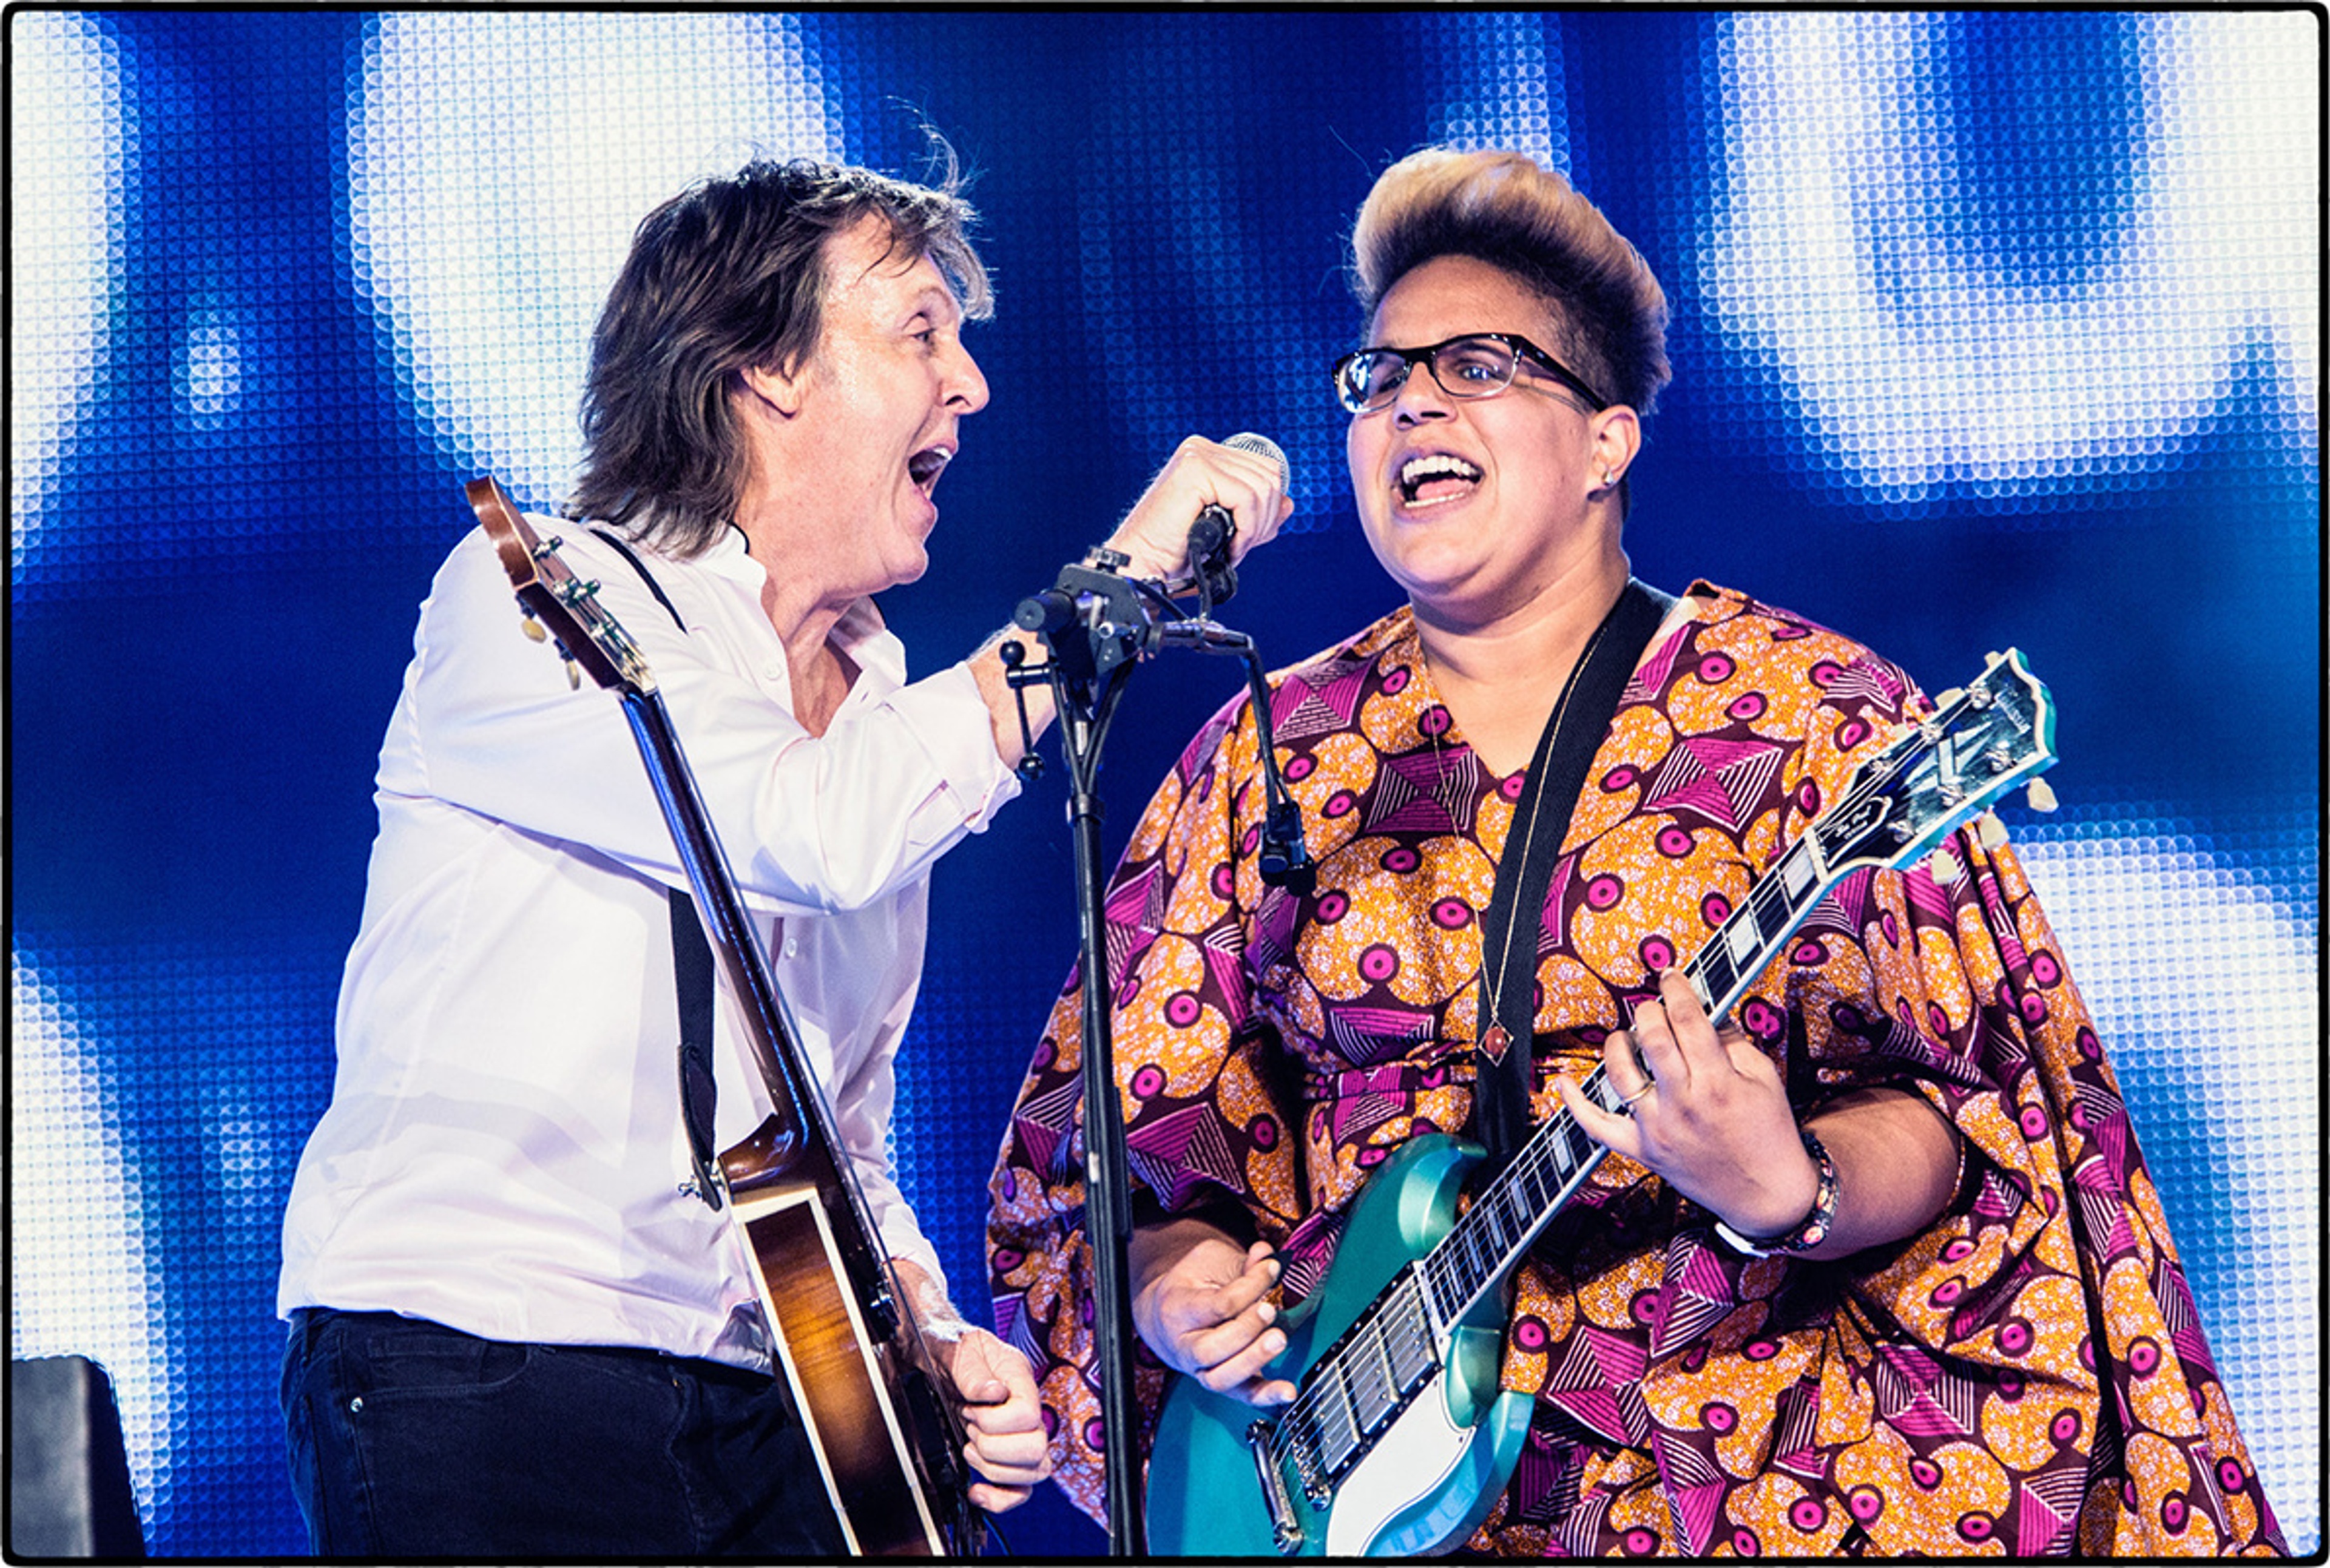 Paul and Brittany Howard performing 'Get Back' at Lollapalooza Festival, Grant Park, Chicago - 31st July 2015